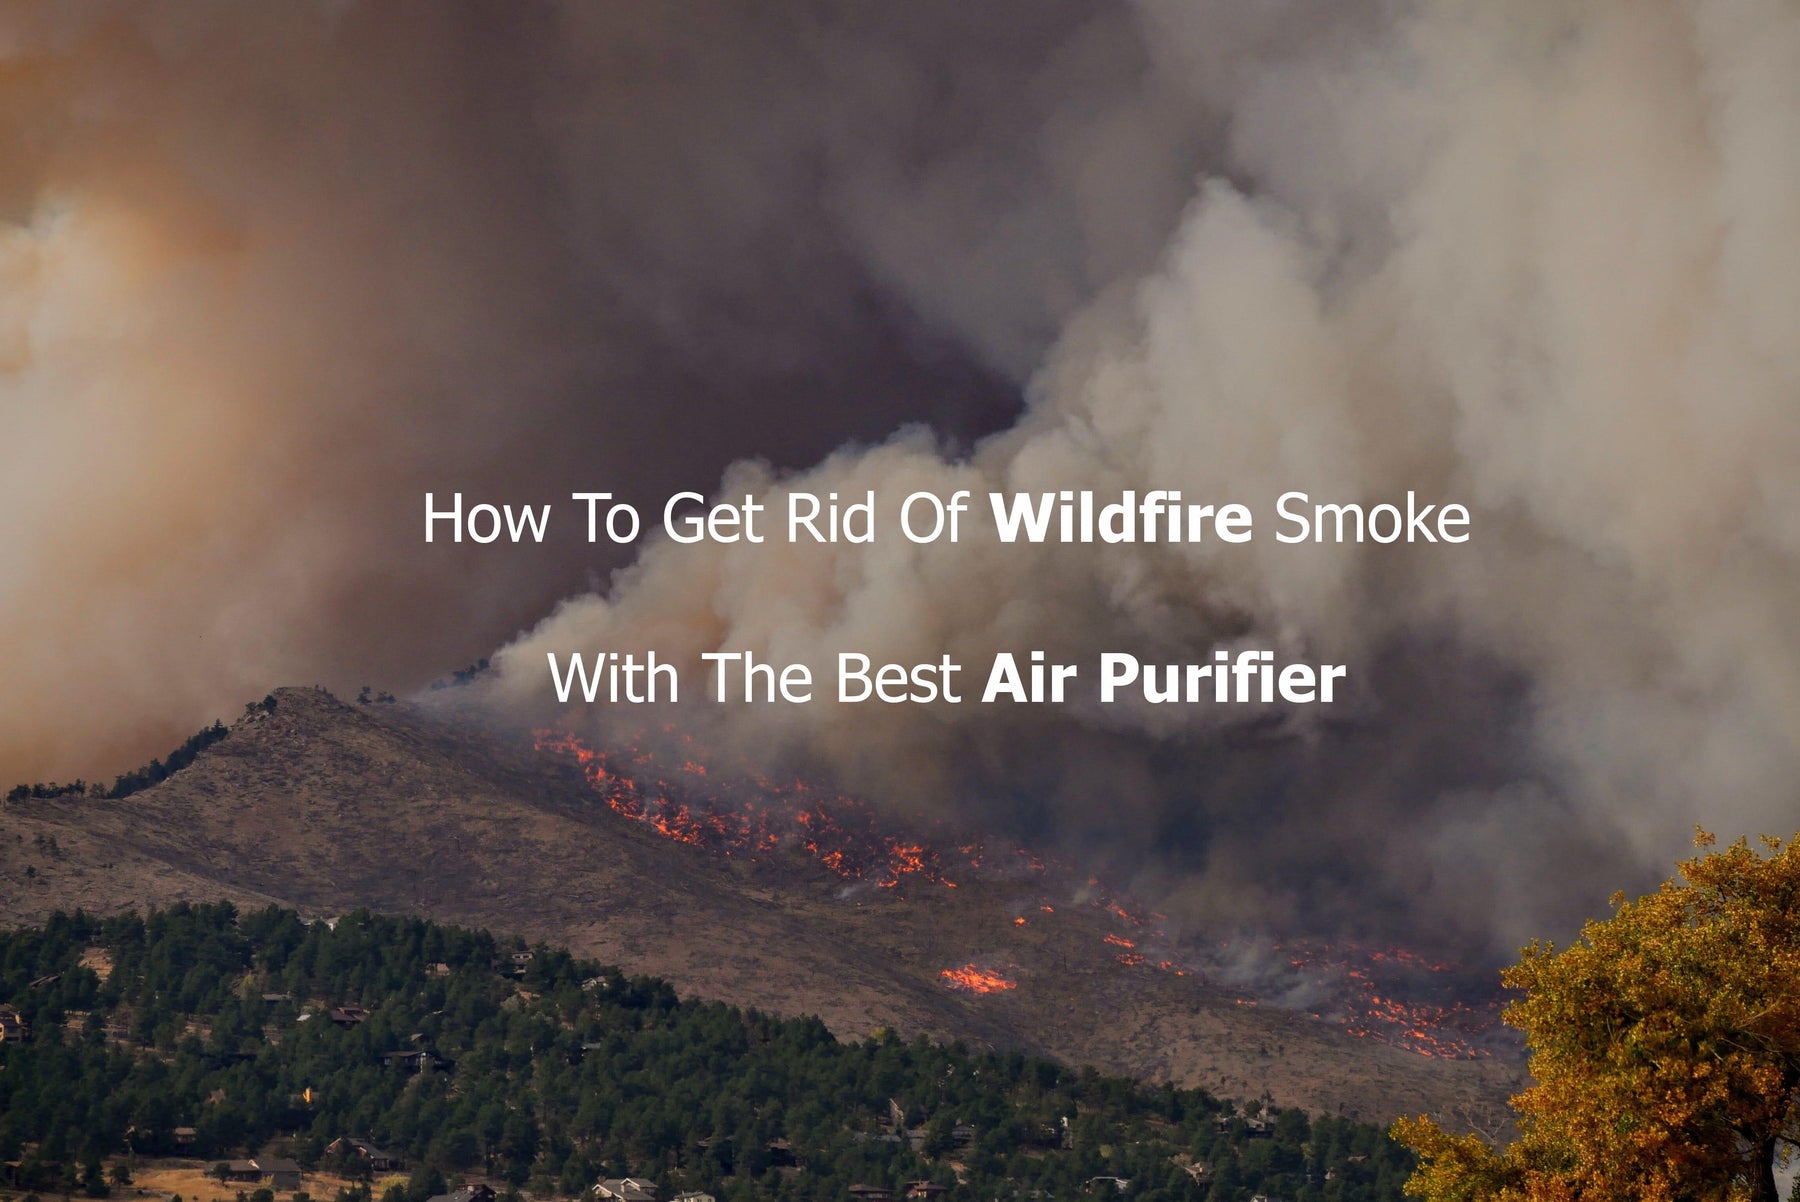 How To Get Rid Of Wildfire Smoke With The Best Air Purifier